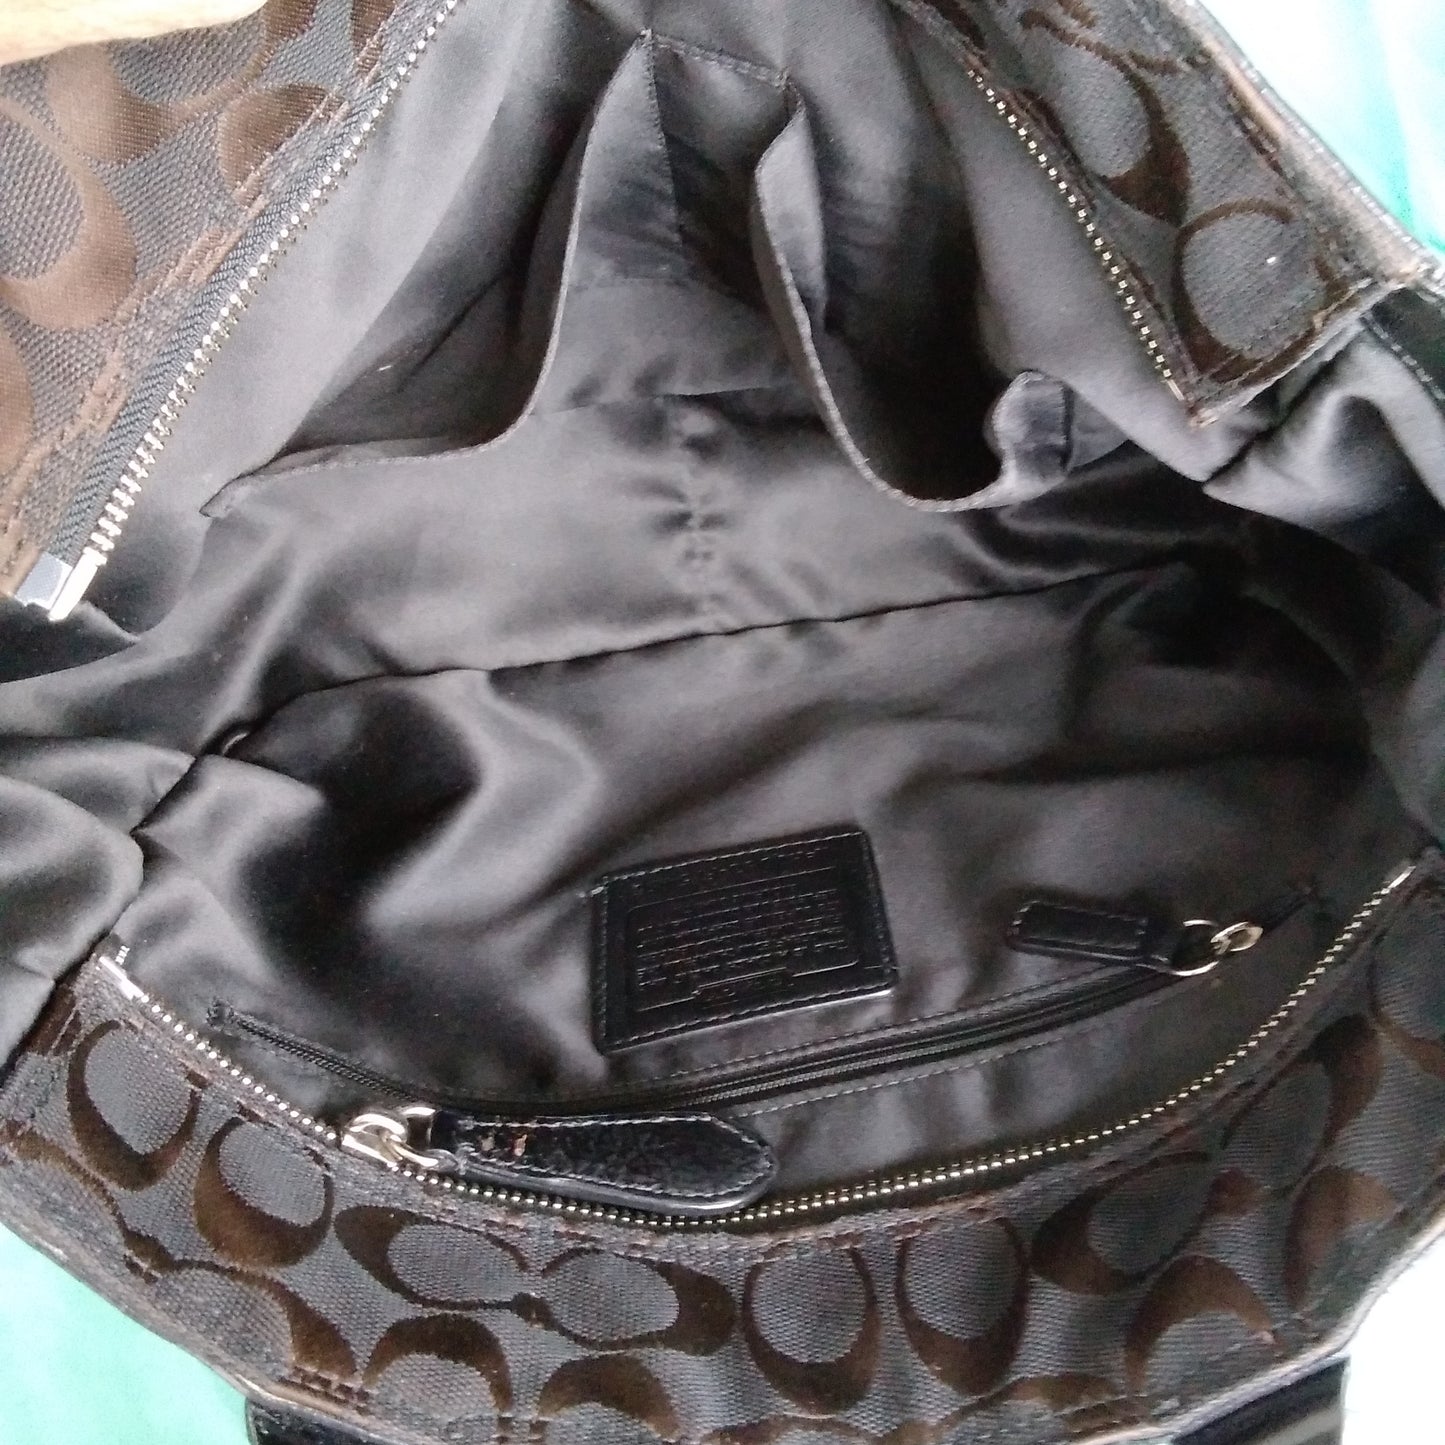 Coach Black and Brown East West Tote